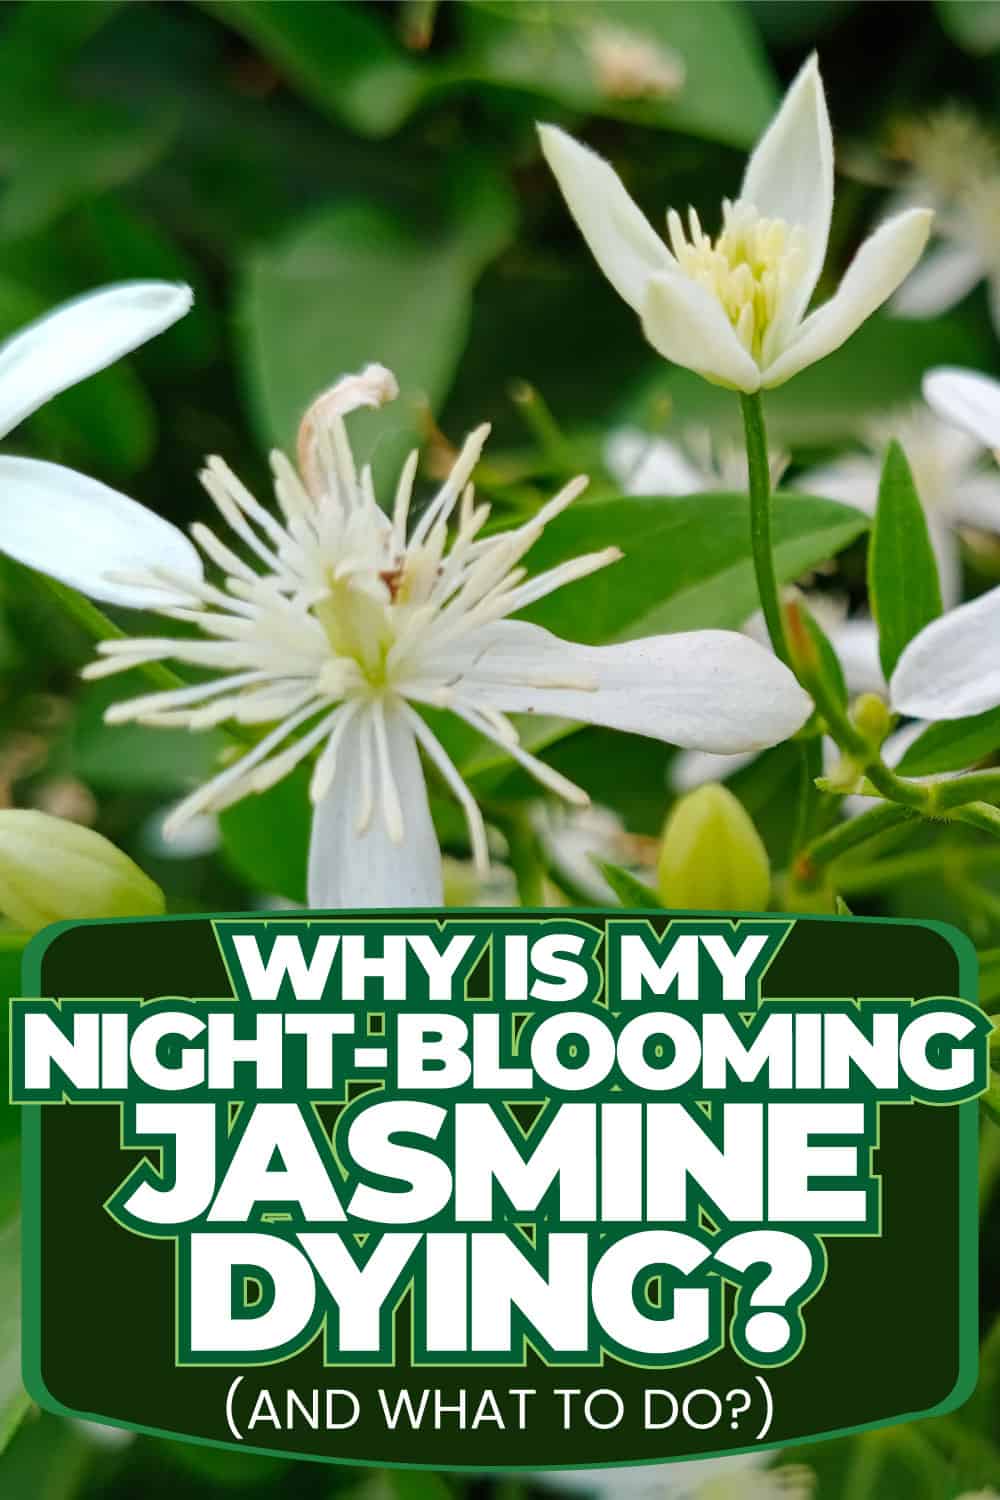 Why Is My Night-Blooming Jasmine Dying? [And What To Do]